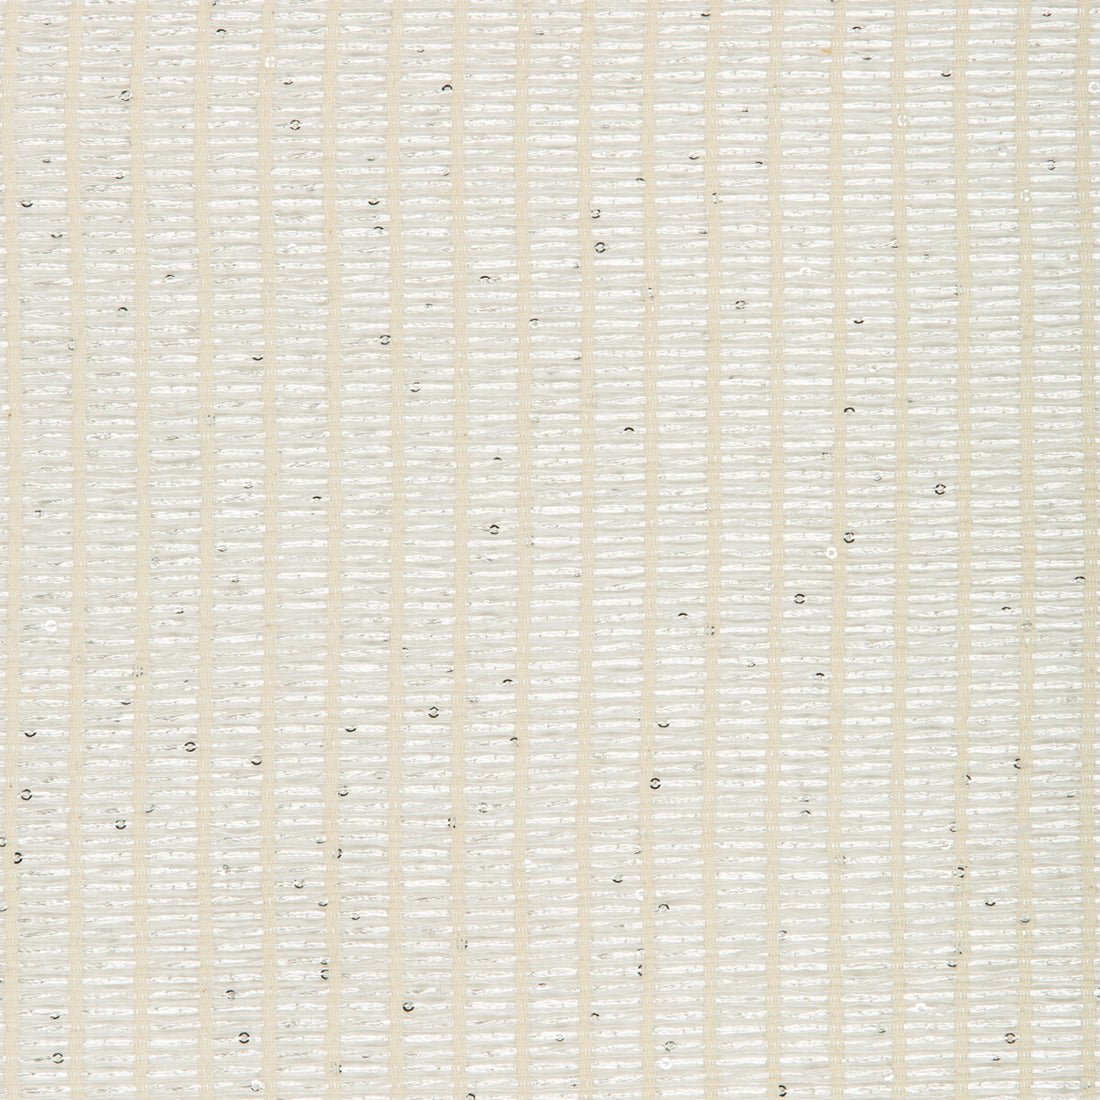 Leno Shine fabric in ivory color - pattern 4620.1.0 - by Kravet Couture in the Izu Collection collection